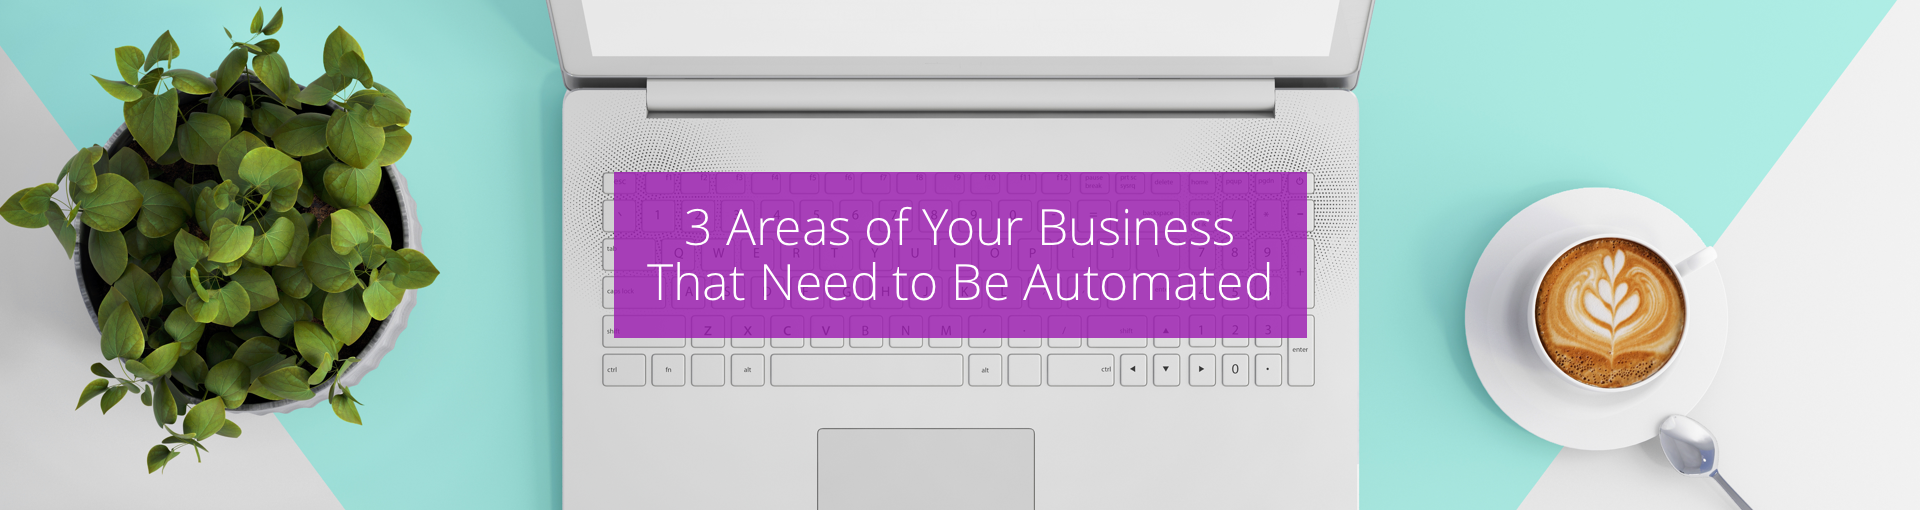 3 Areas of Your Business That Need to Be Automated Featured Image